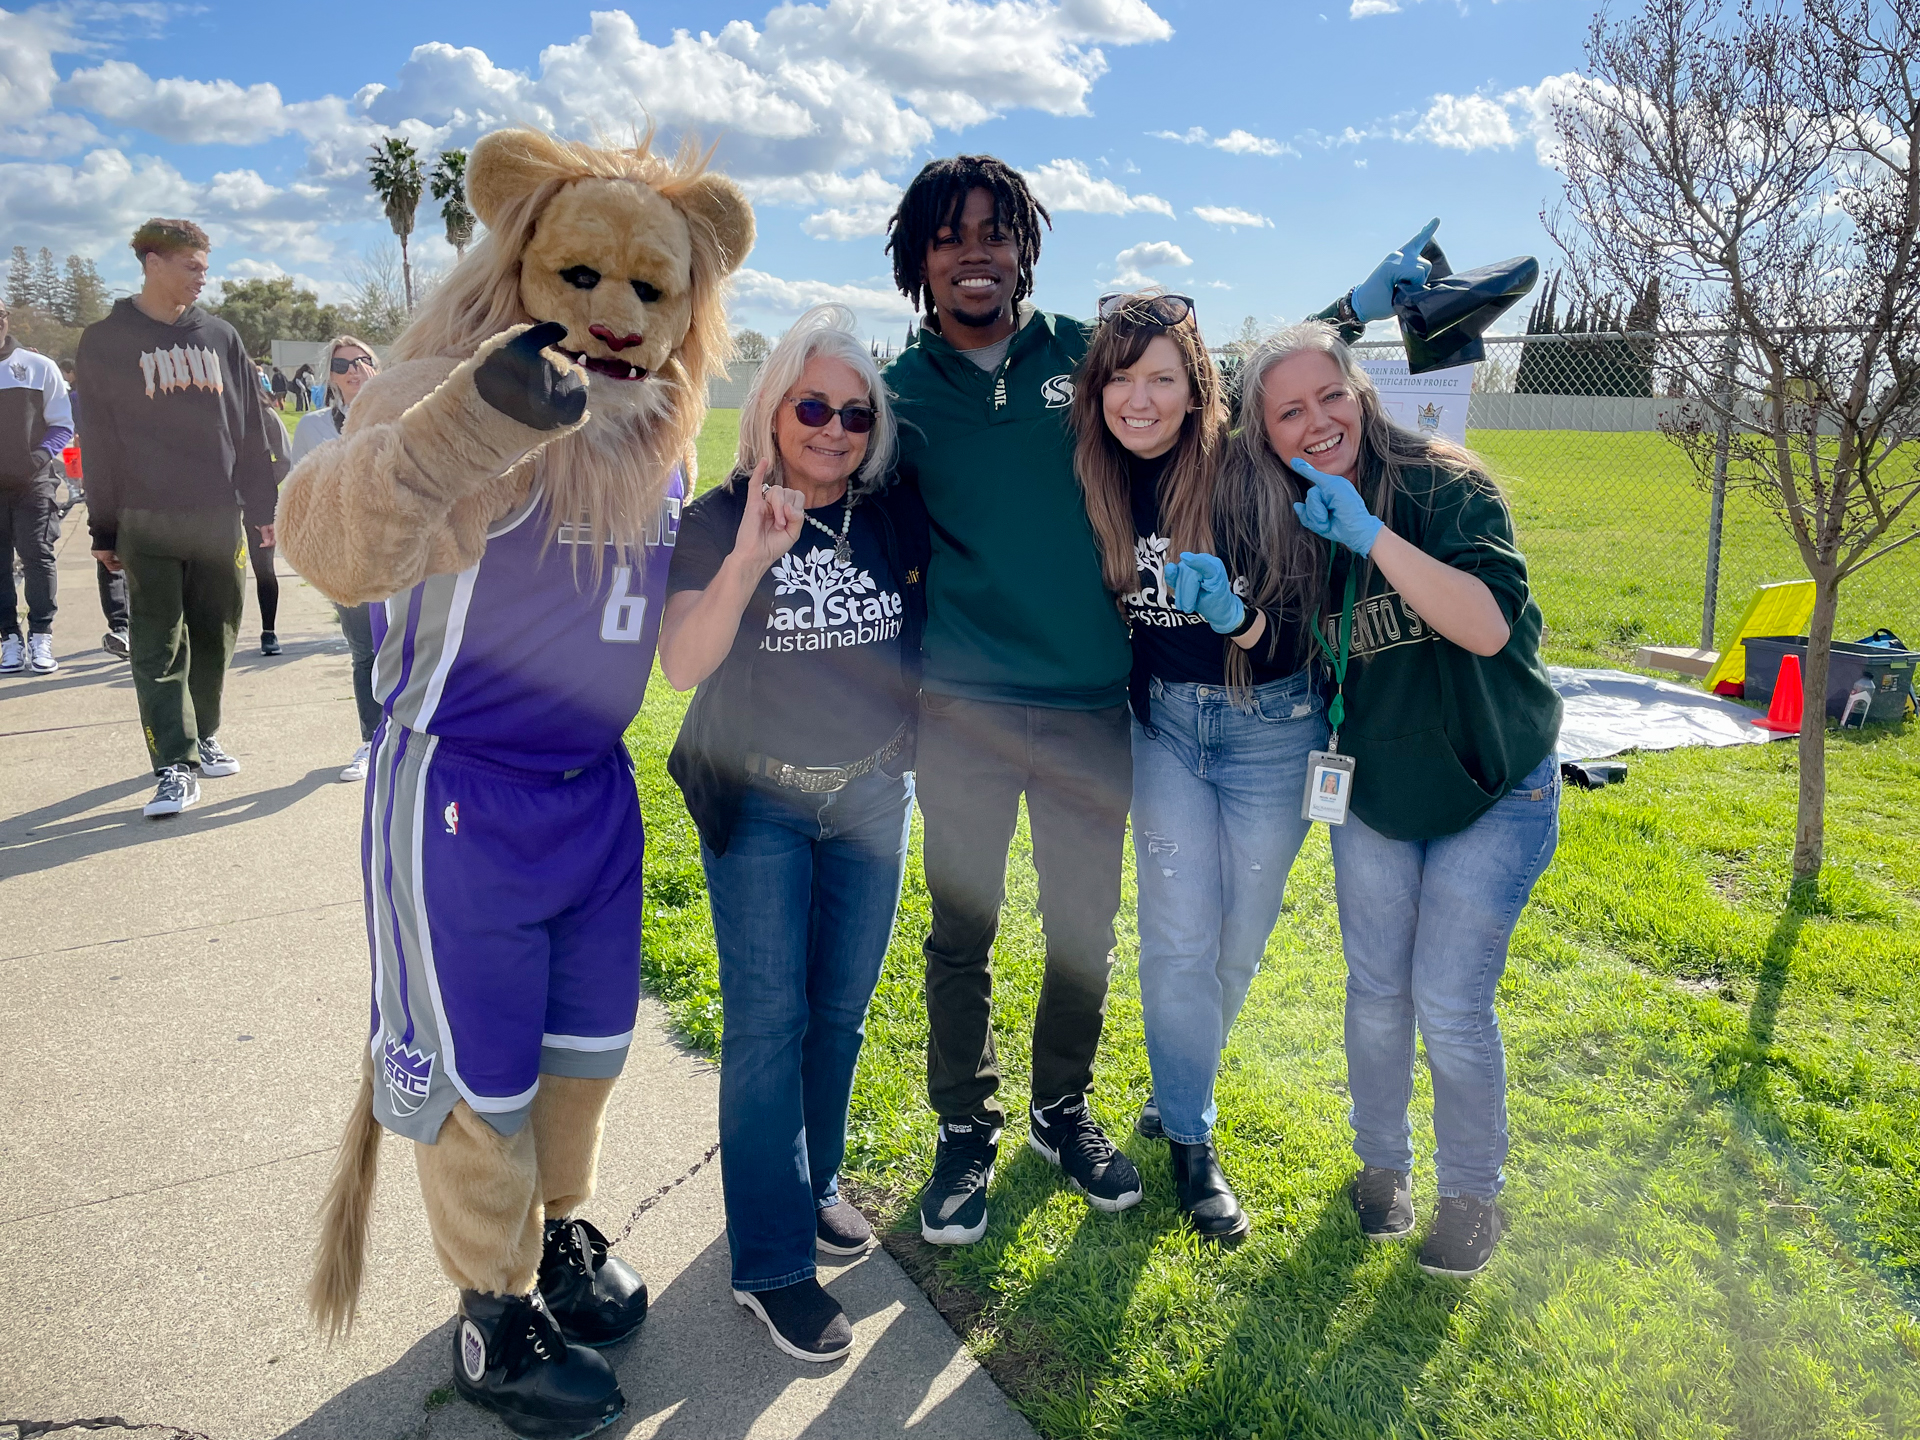 Four individuals pose, outdoors, with the Sacramento Kings mascot Slamson, making the "stingers up" hand gesture